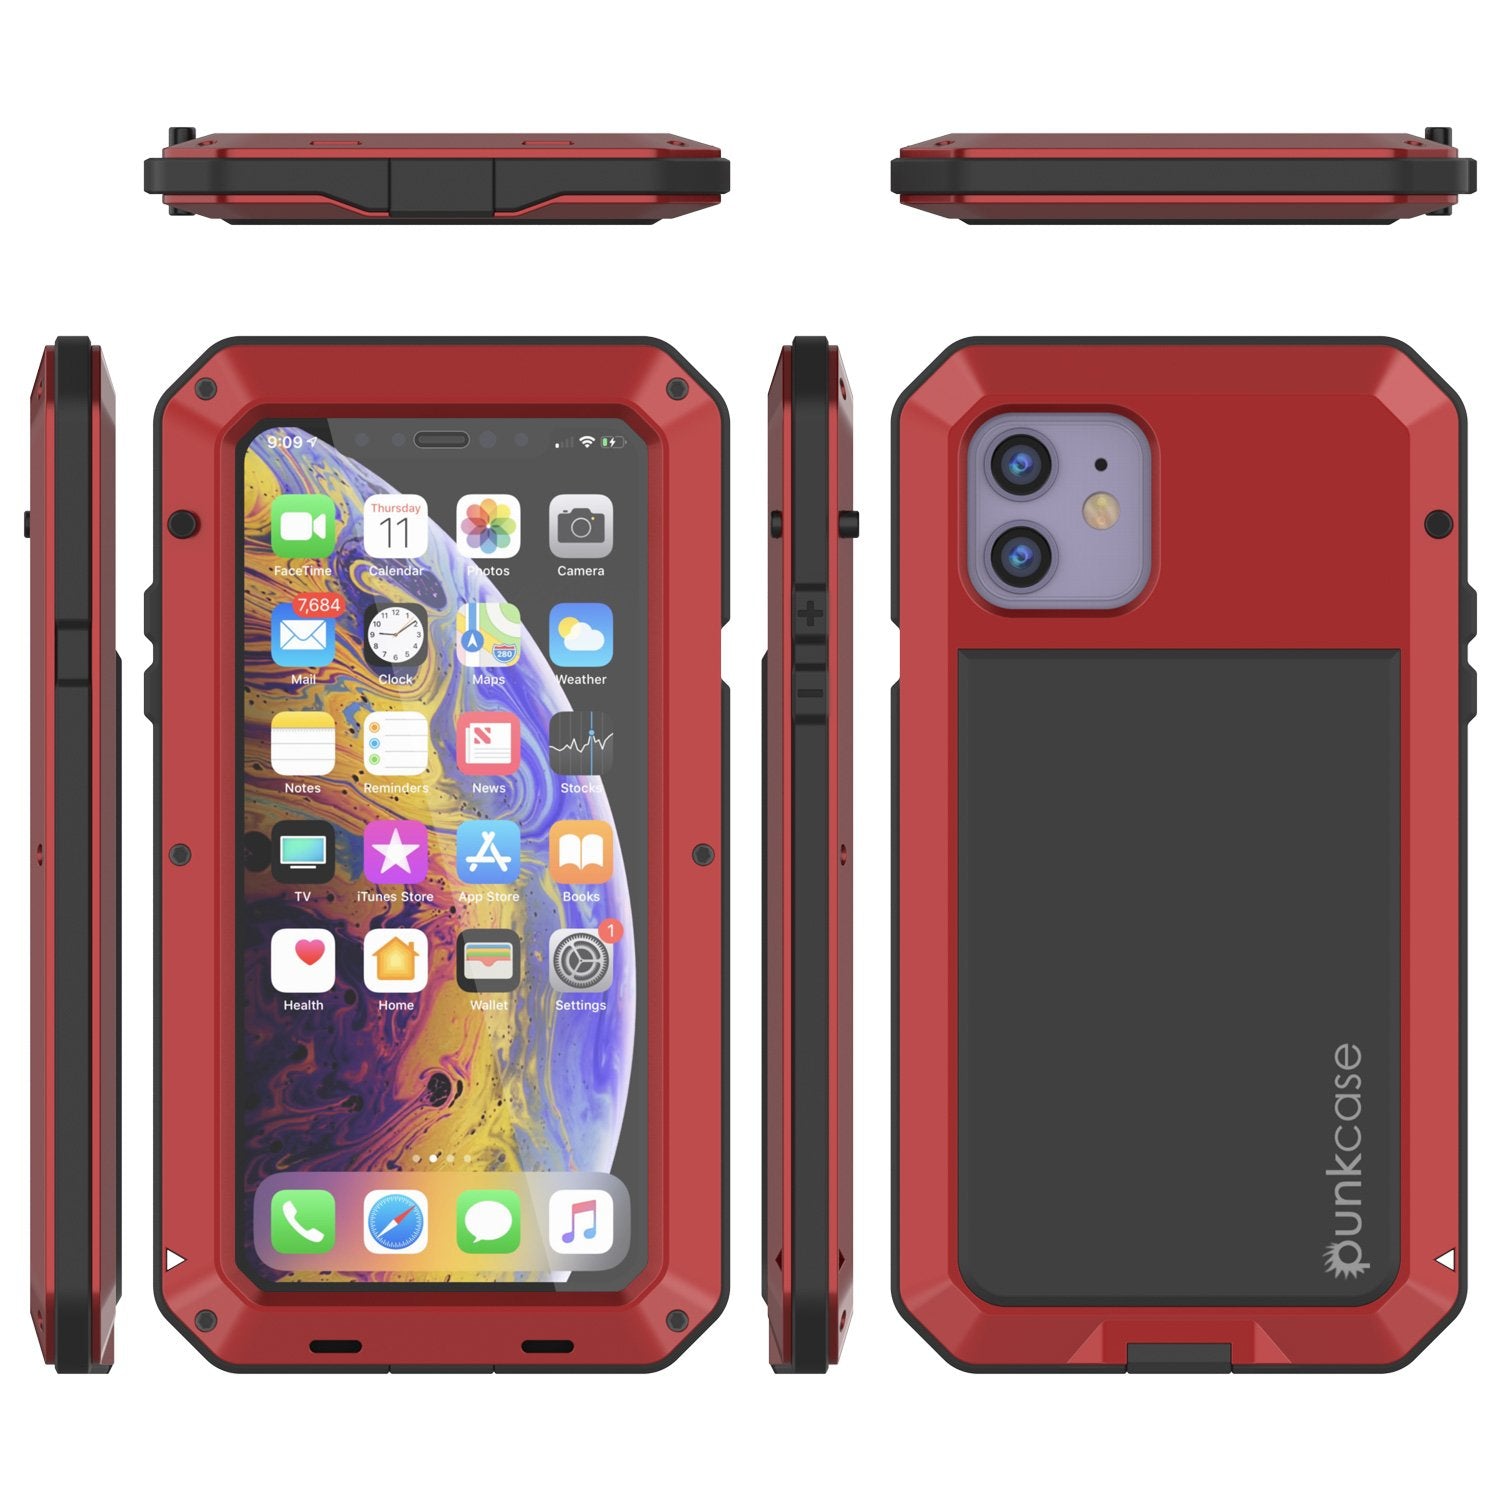 iPhone 11 Metal Case, Heavy Duty Military Grade Armor Cover [shock proof] Full Body Hard [Red]